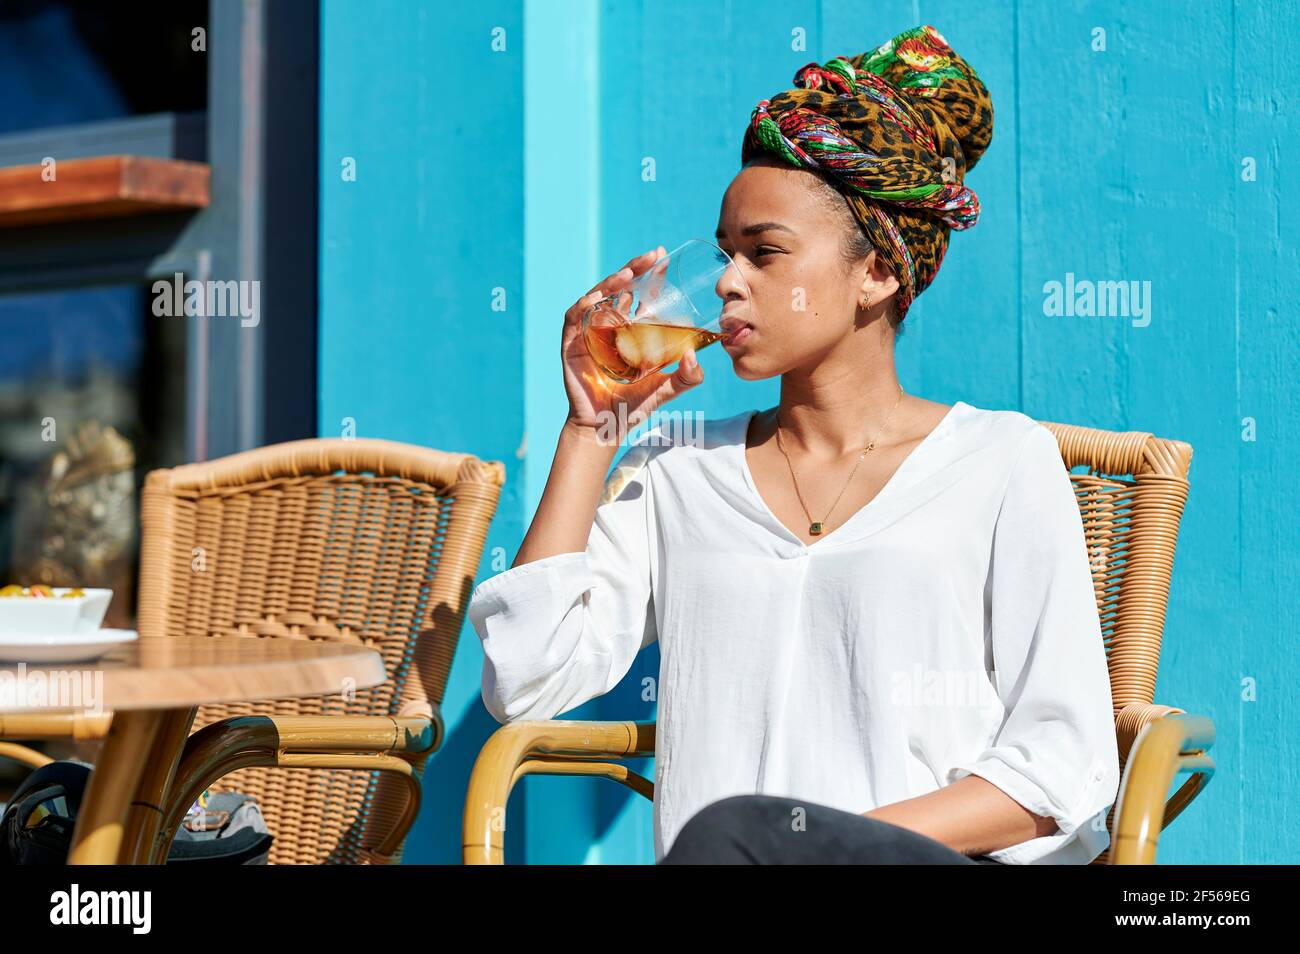 Woman wearing headscarf drinking alcohol while sitting at bar Stock Photo